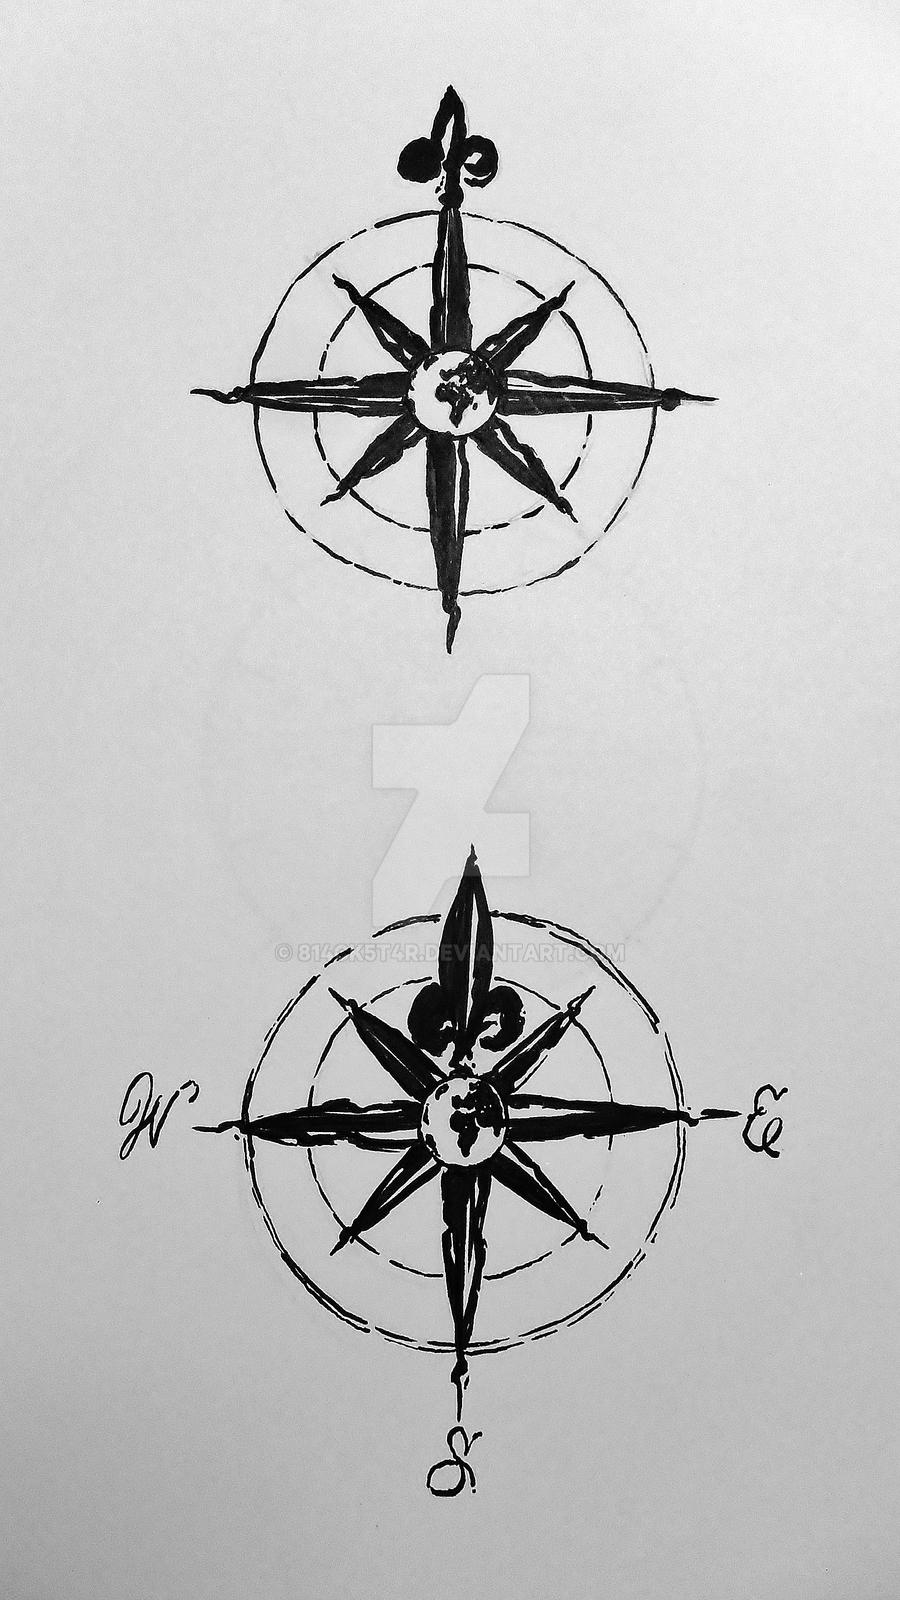 Antique Compass Tattoos (Commission) by Blackstar by 814CK5T4R on ...